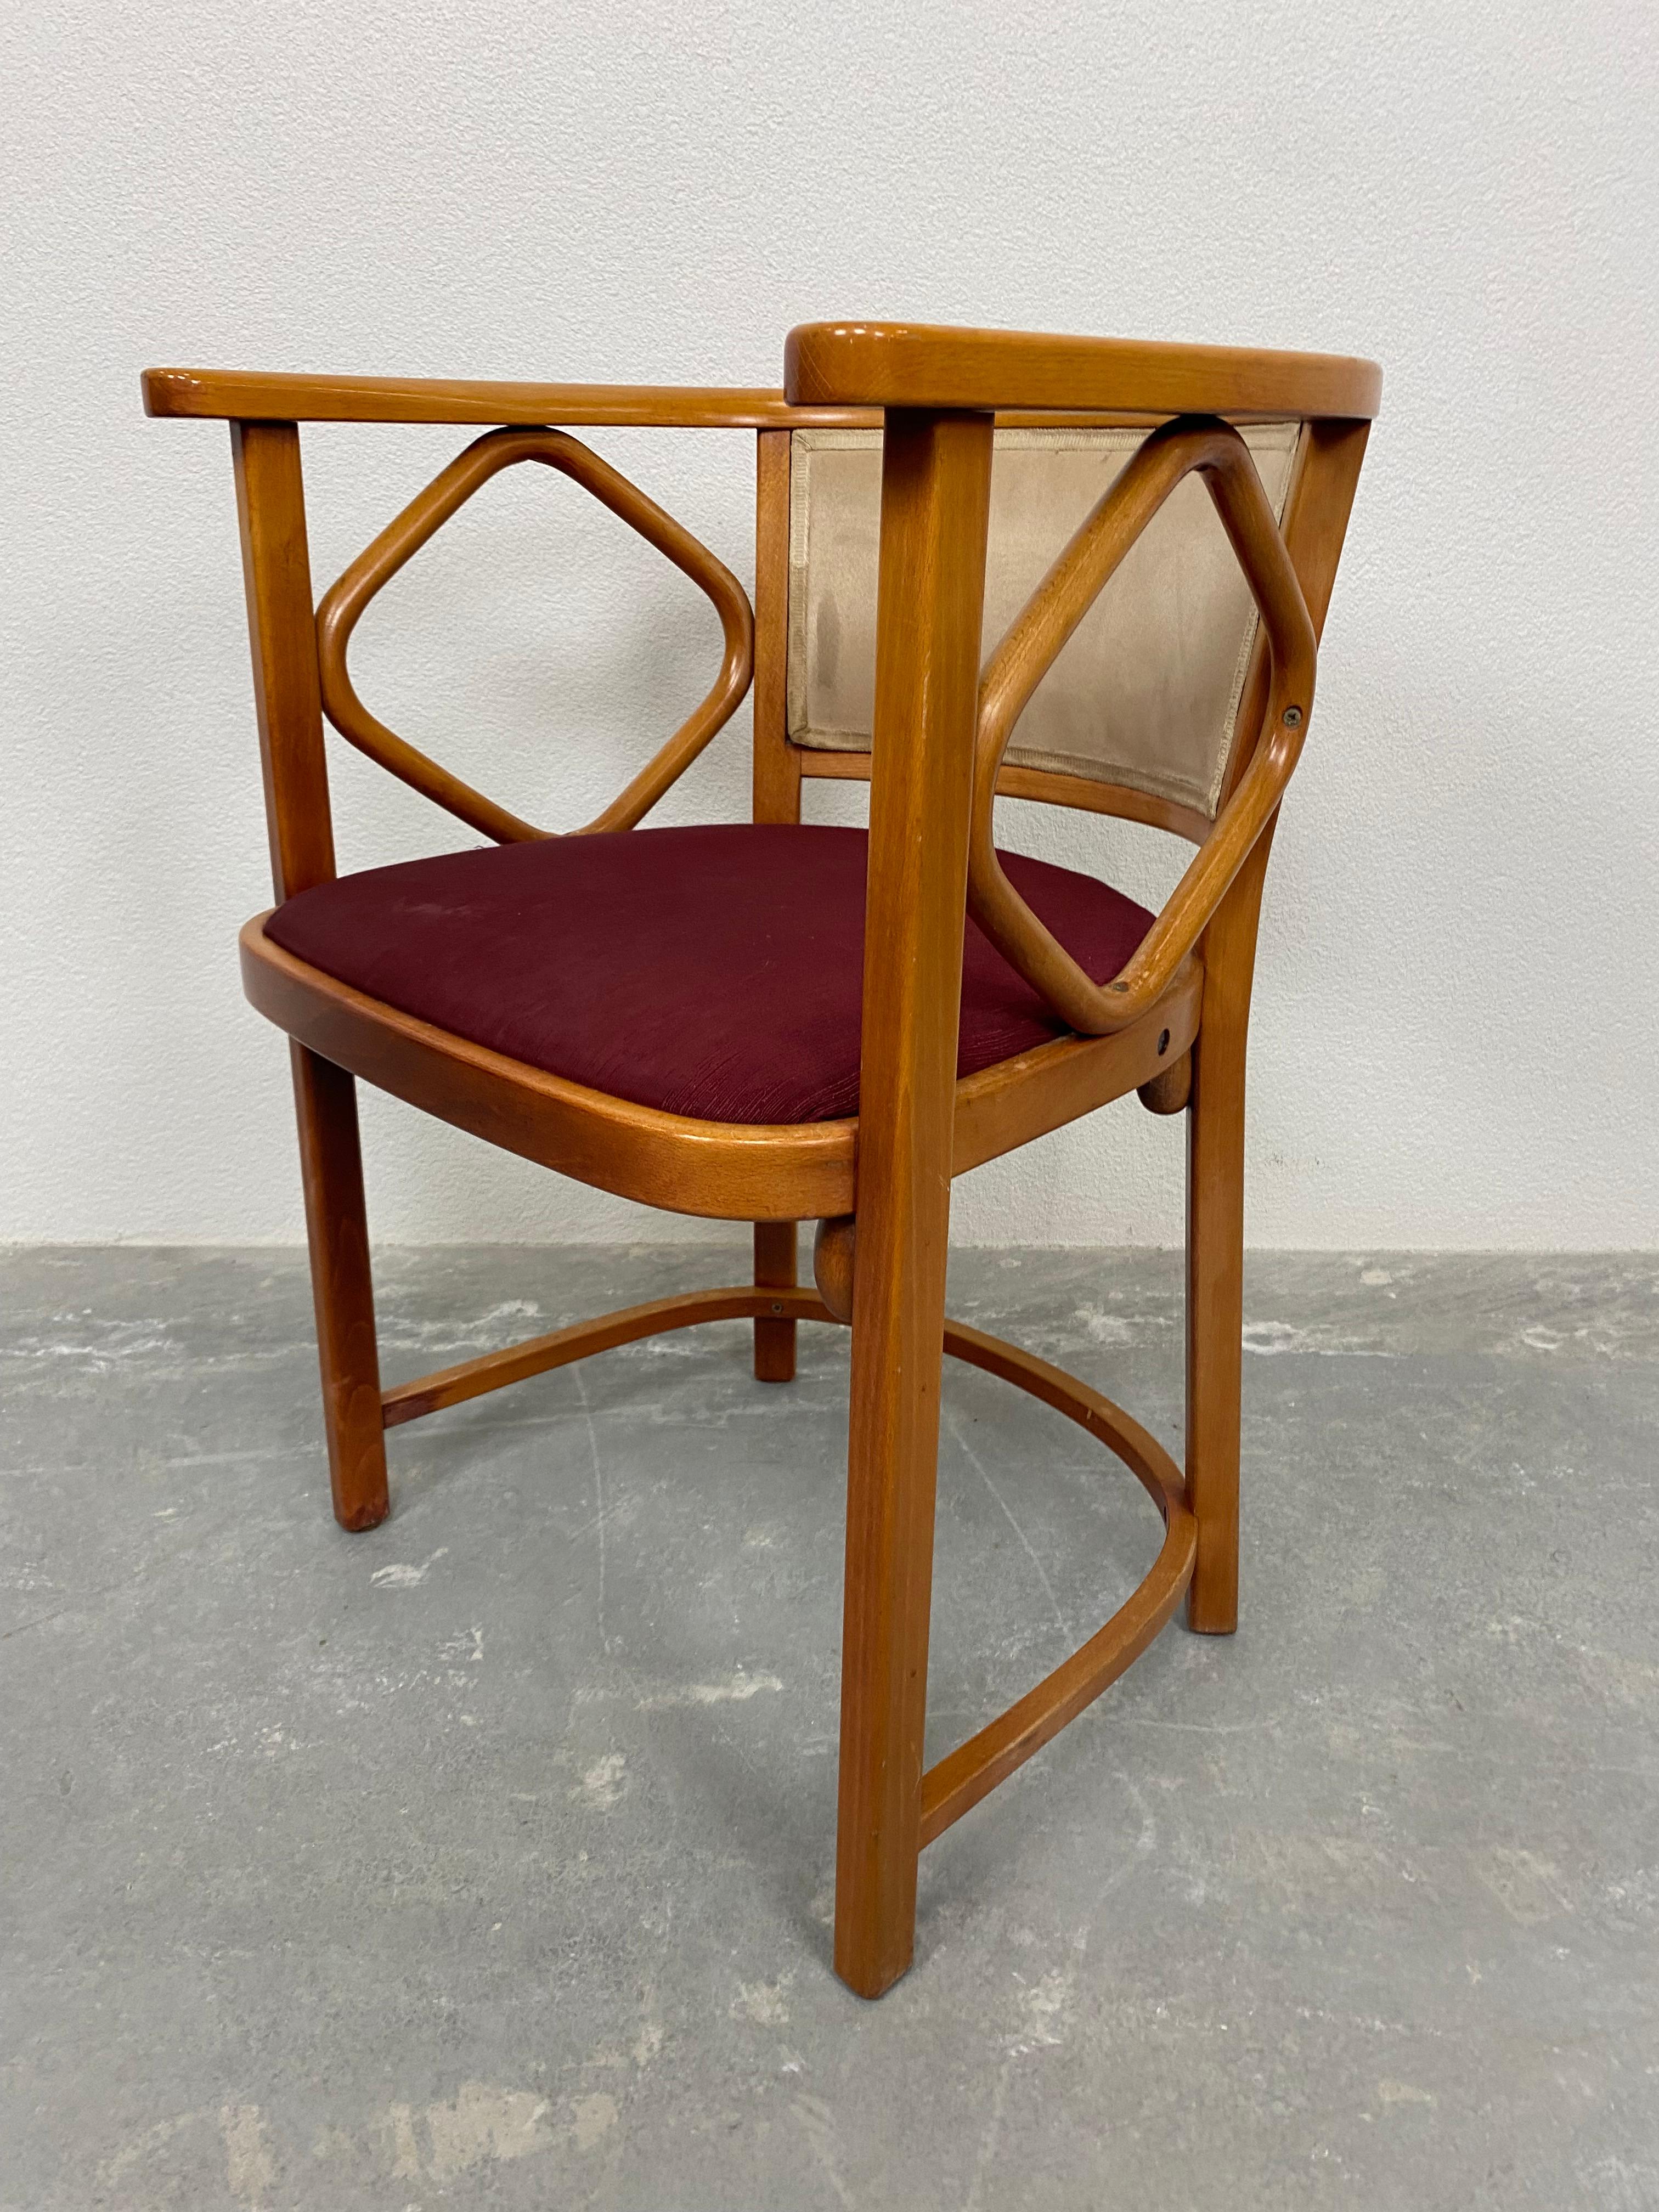 Slovak Set of 4 Fledermaus Chairs Executed by Thonet For Sale